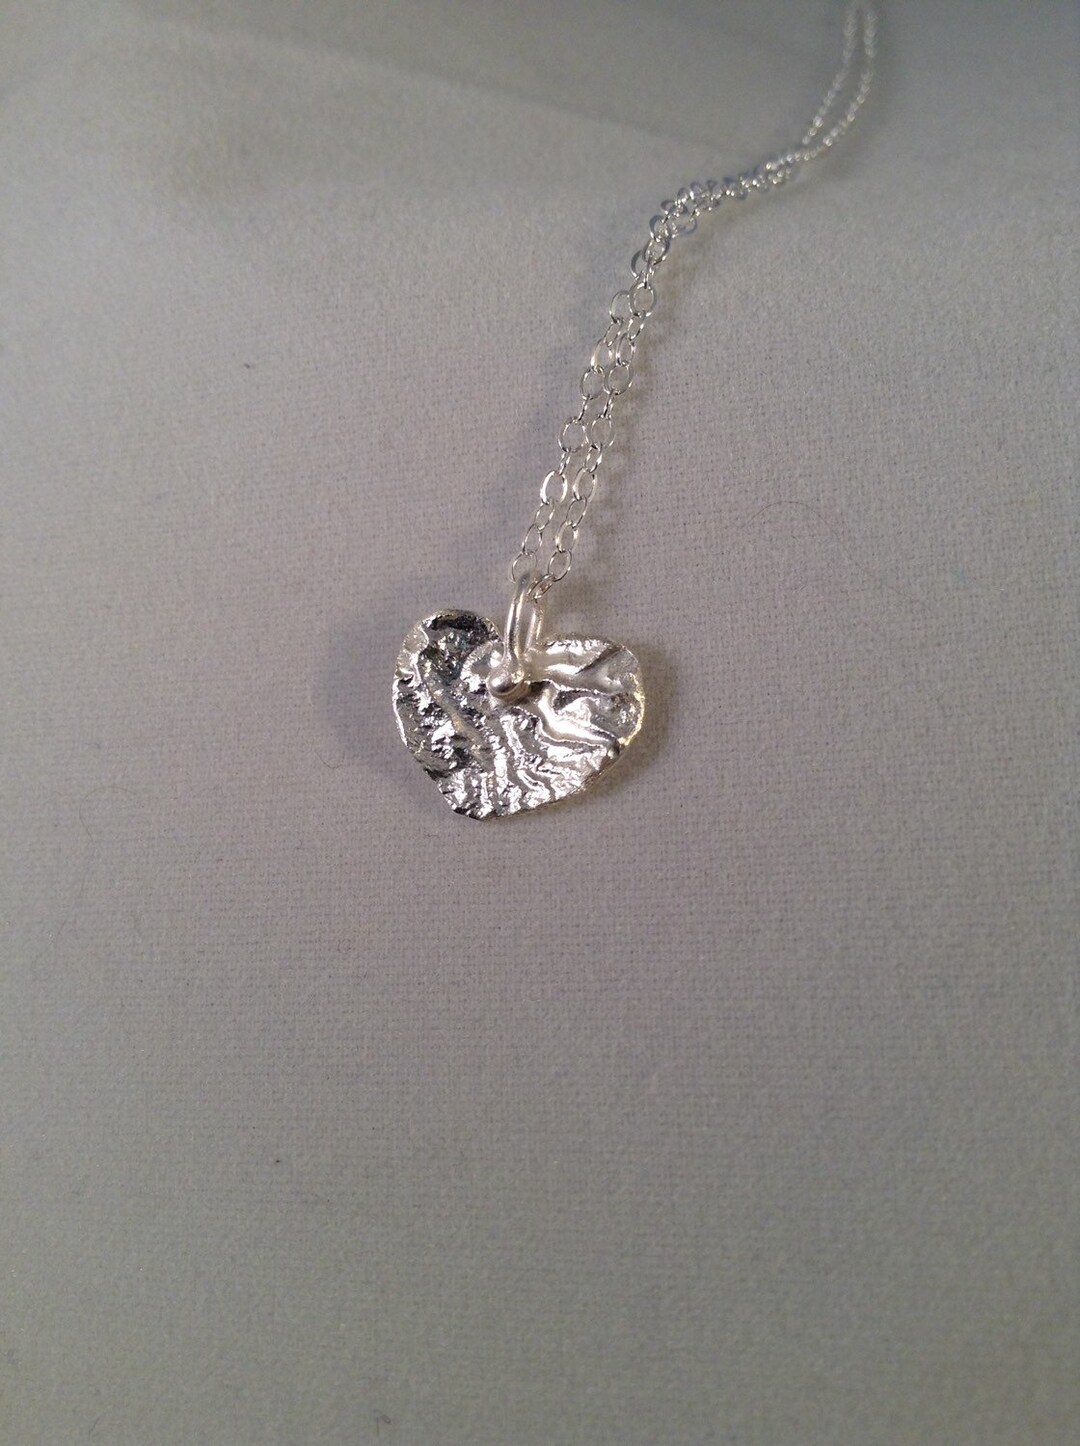 Reticulated Heart Necklace - Etsy